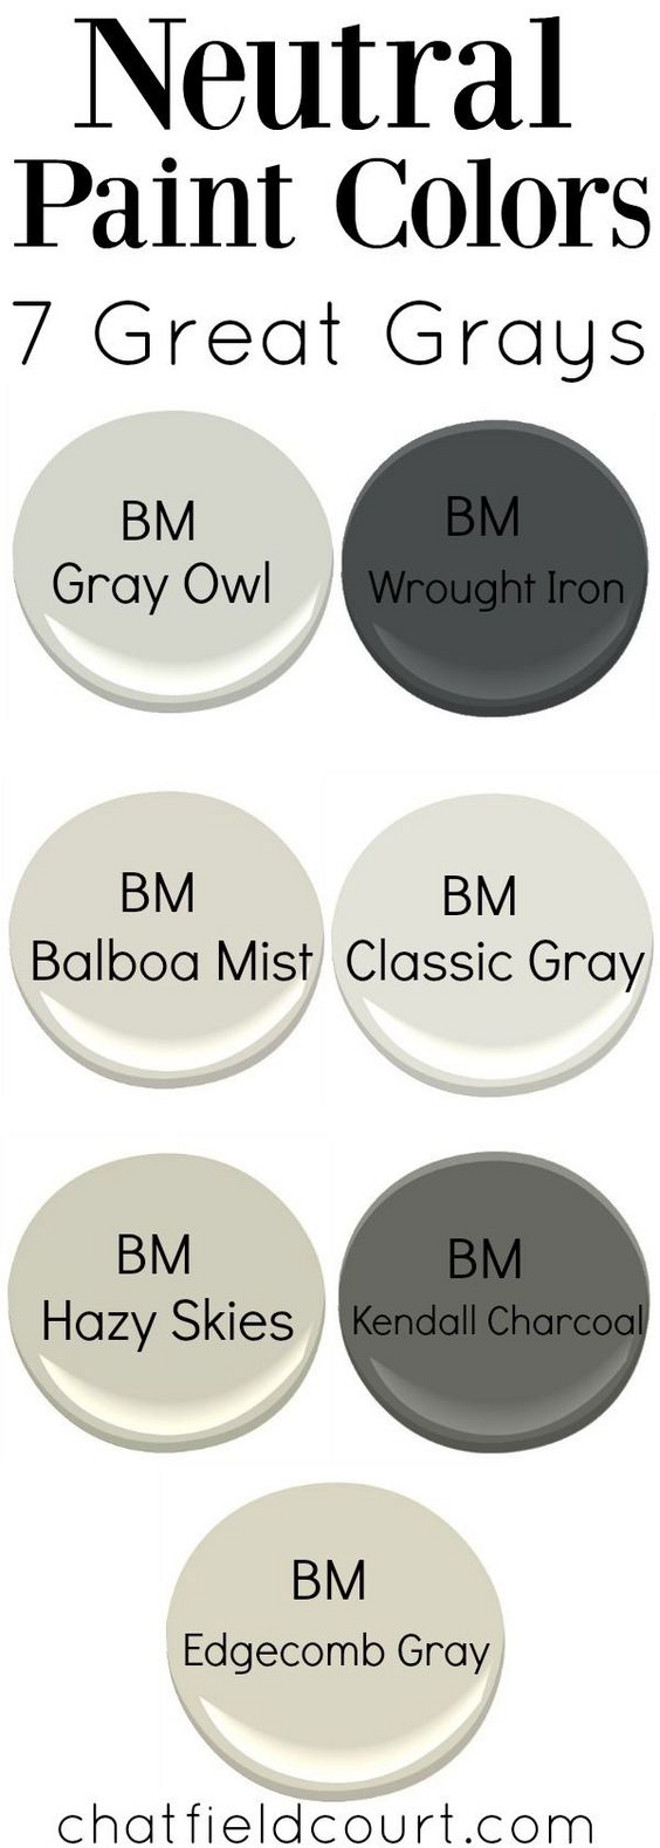 Grey Paint Colors. Popular Benjamin Moore Grey Paint Colors. There are so many great grays to choose from, but here are my 7 favorite gray paint colors from Benjamin Moore. Benjamin Moore Gray Owl. Benjamin Moore Wrought Iron. Benjamin Moore Balboa Mist. Benjamin Moore Classic Gray. Benjamin Moore Hazy Skies. Benjamin Moore Kendall Charcoal. Benjamin Moore Edgecomb Gray. Via Chatfield Court.